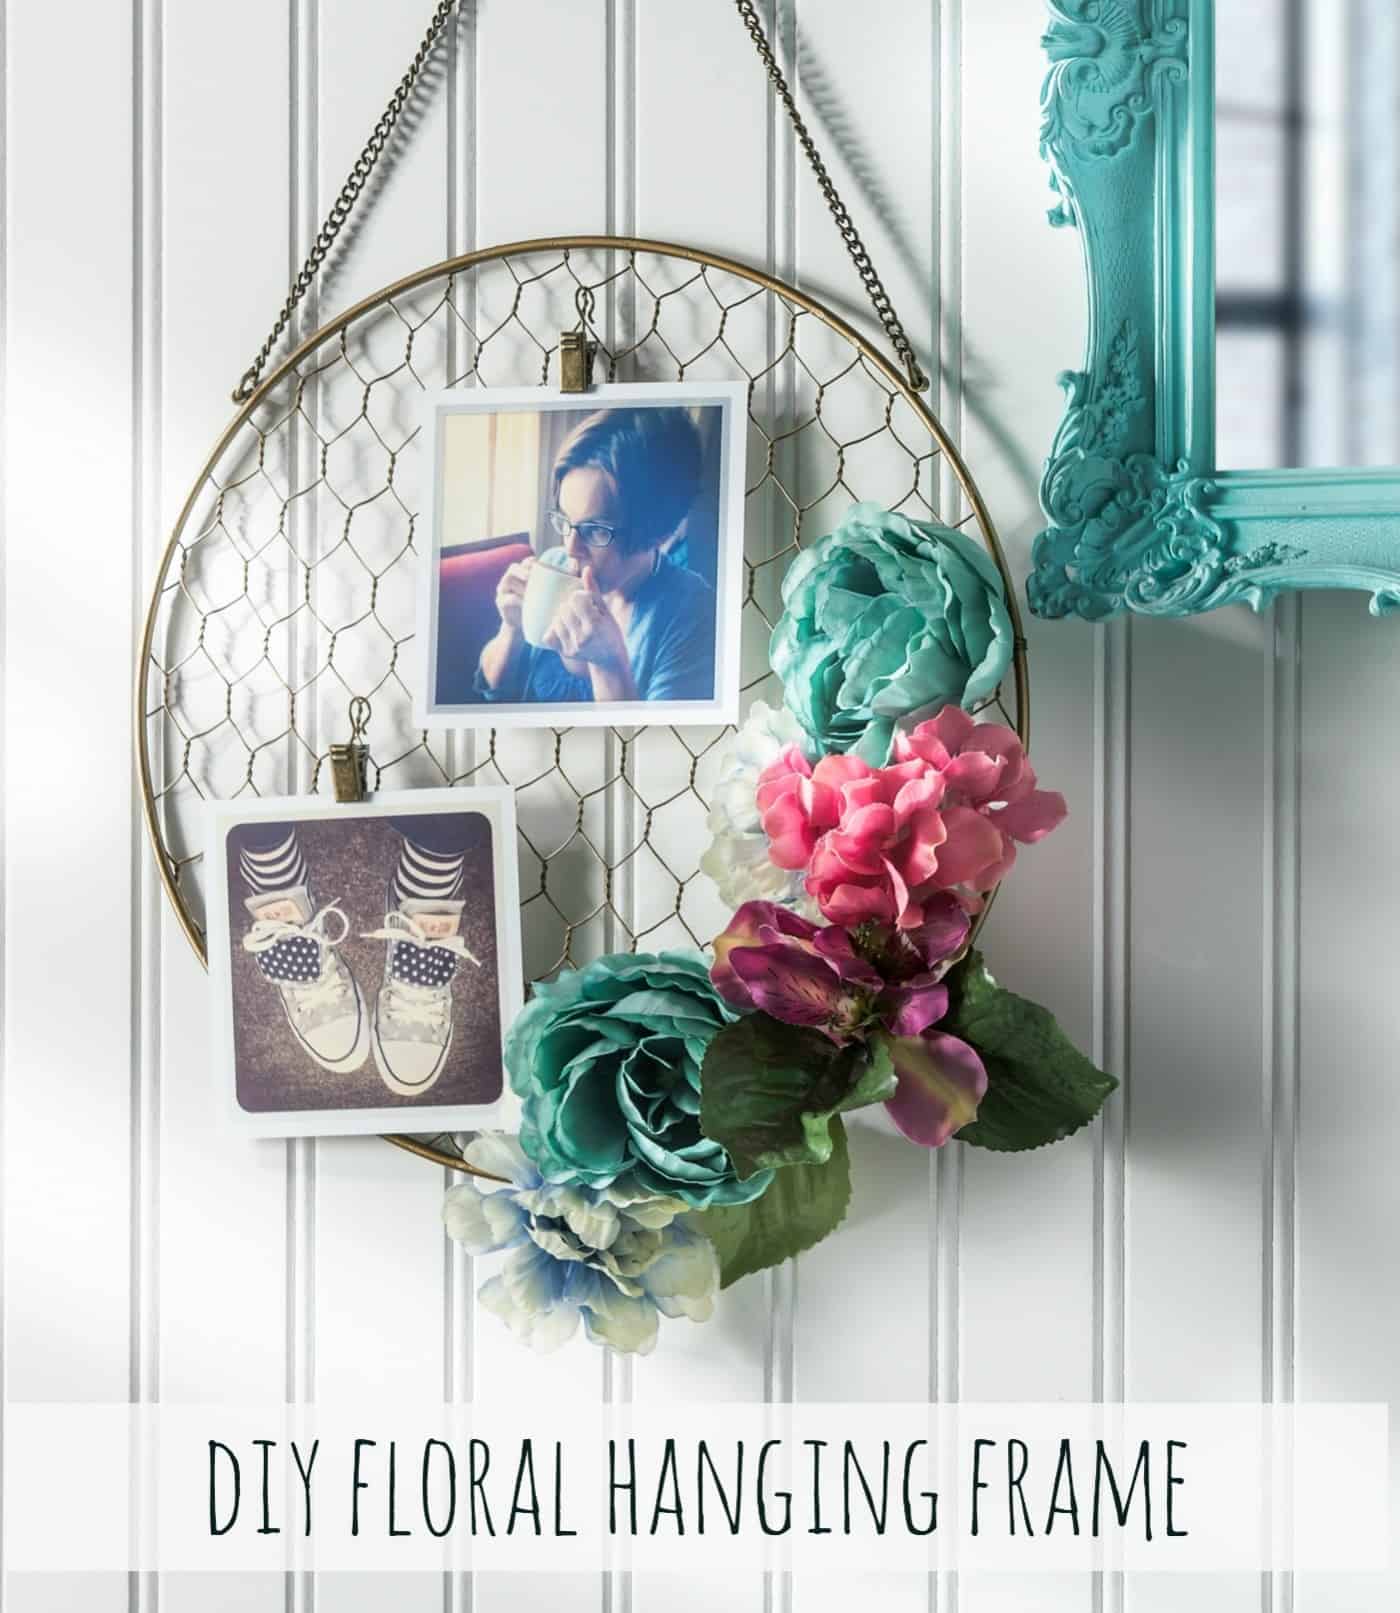 Hanging Photo Frame Decorated with Flowers